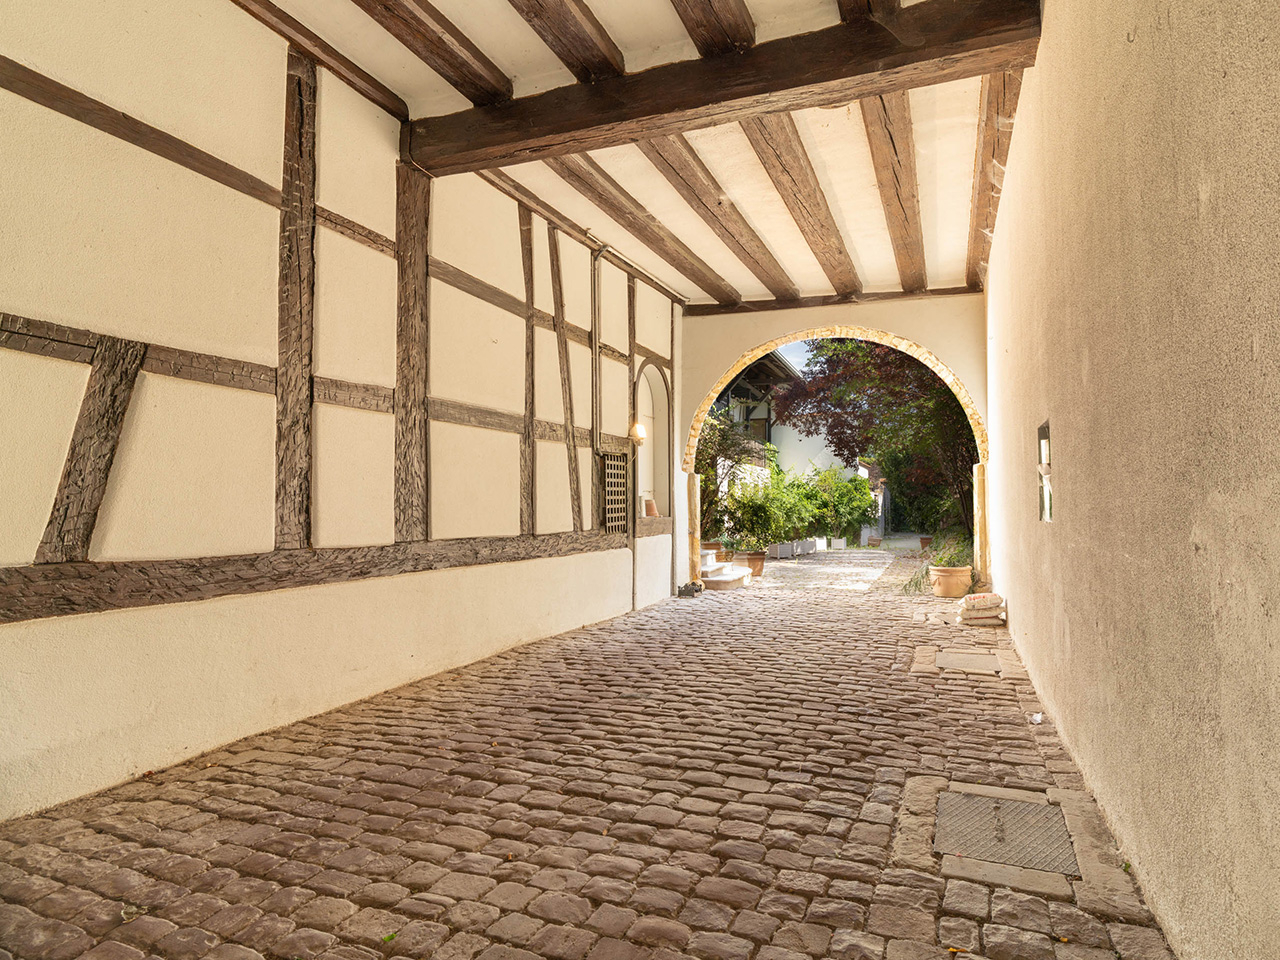 real estate - Eguisheim - House 16.0 rooms